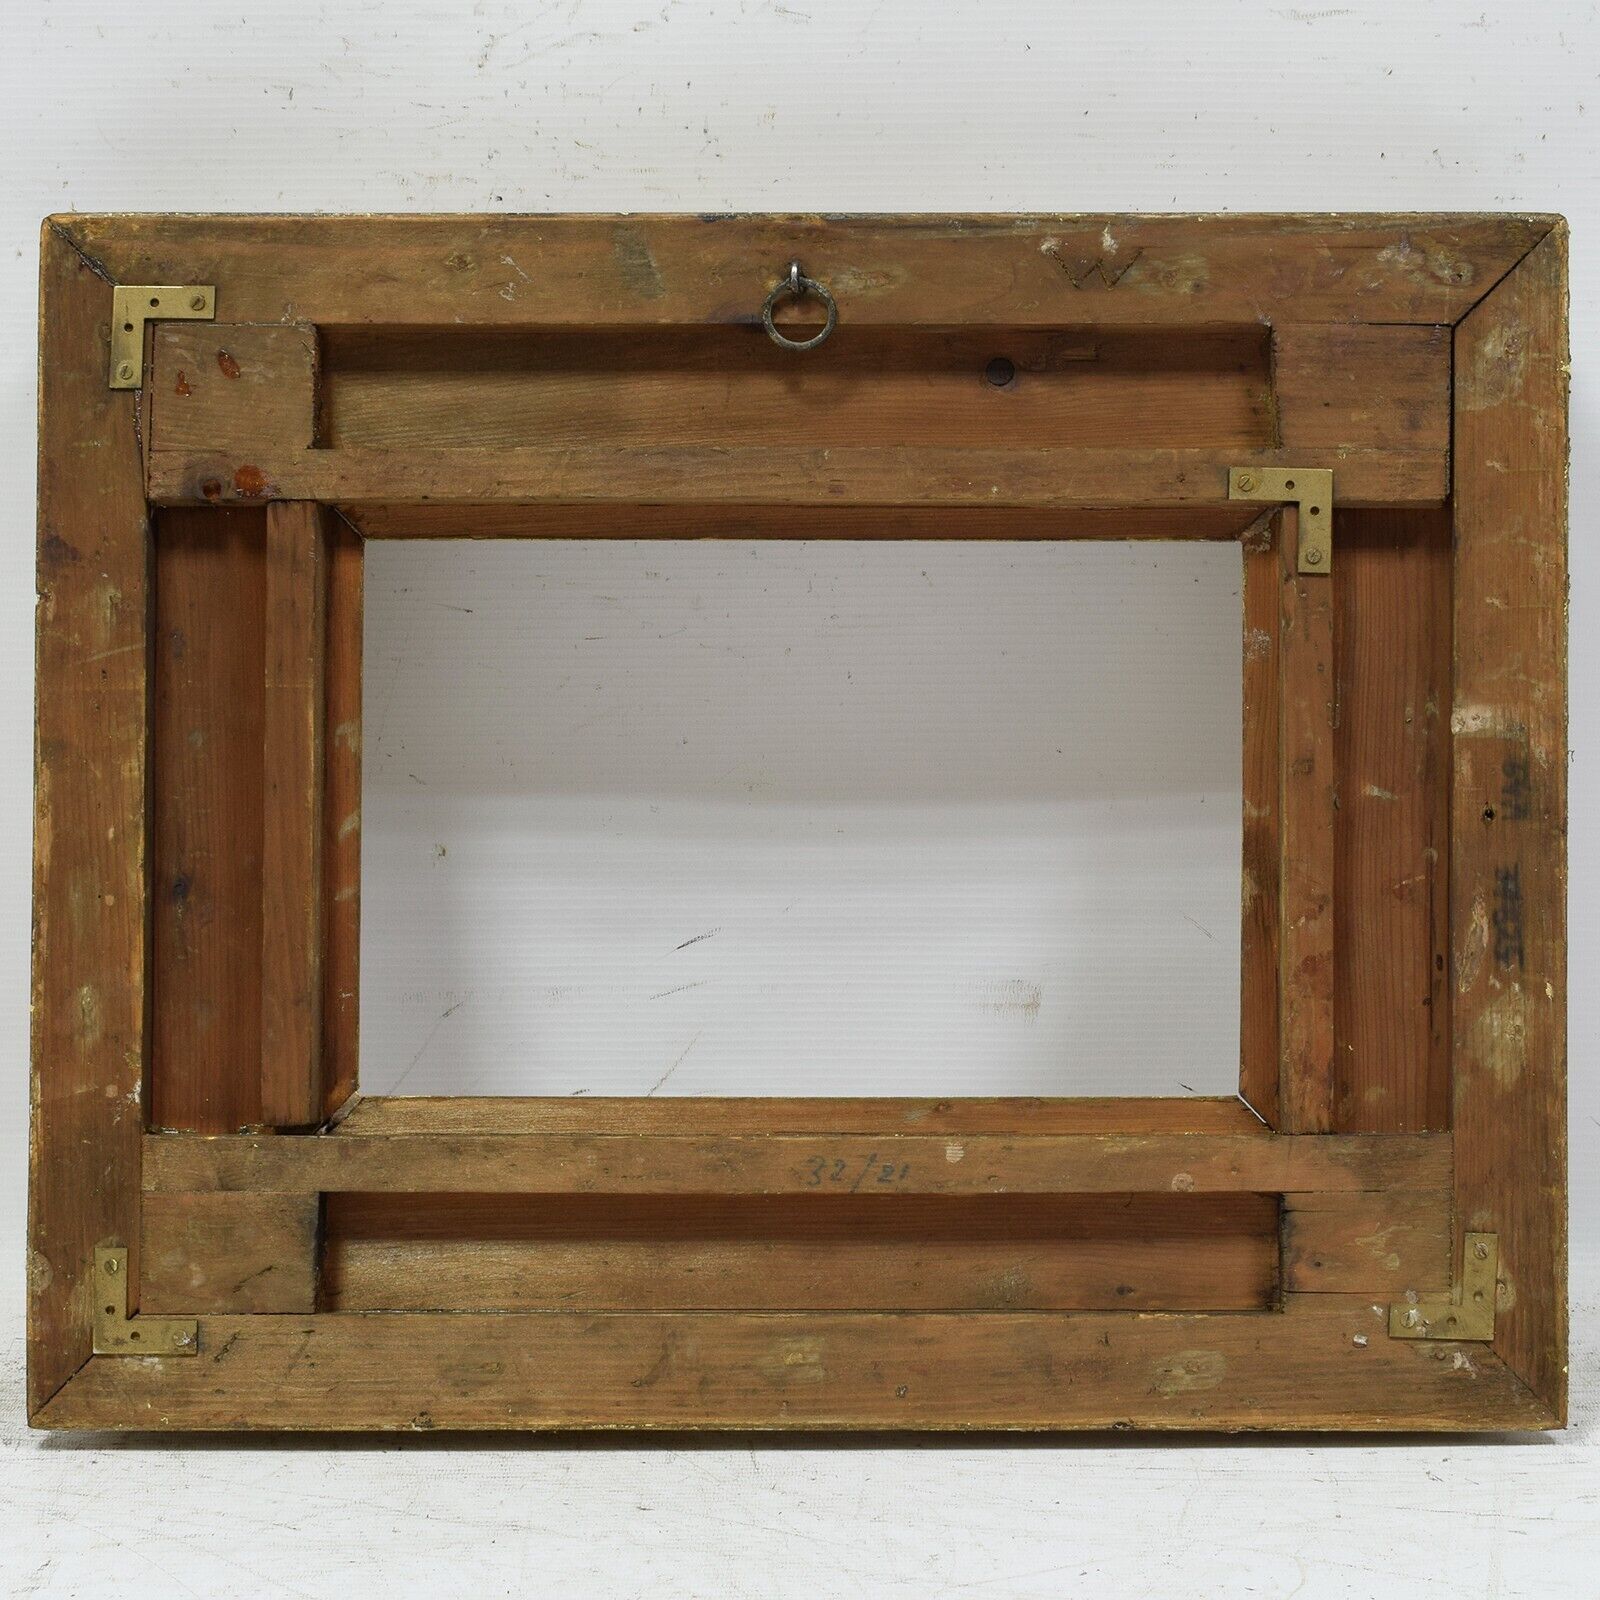 Ca. 1880-1900 old wooden painting frame fold dimensions 12.8 x 8.3 in